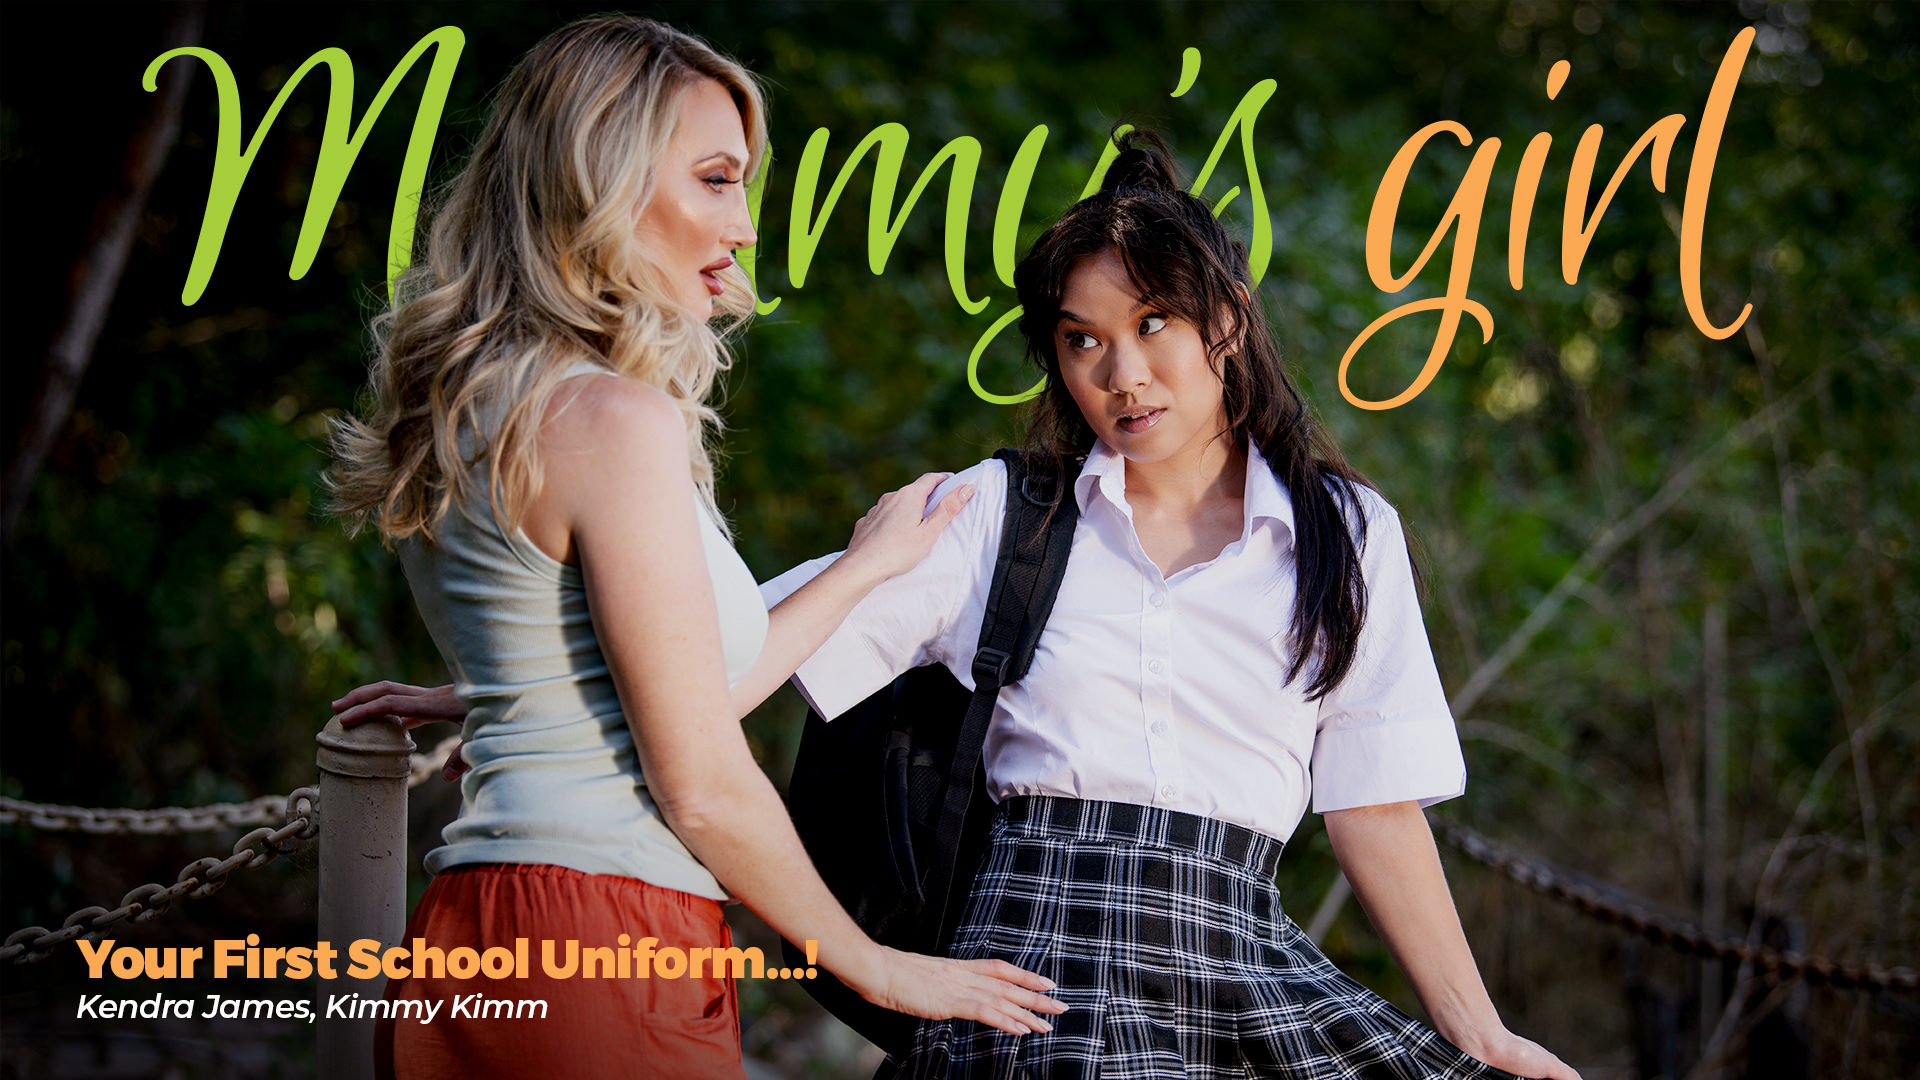 Mommys Girl Kendra James, Kimmy Kimm Your First School Uniform...!